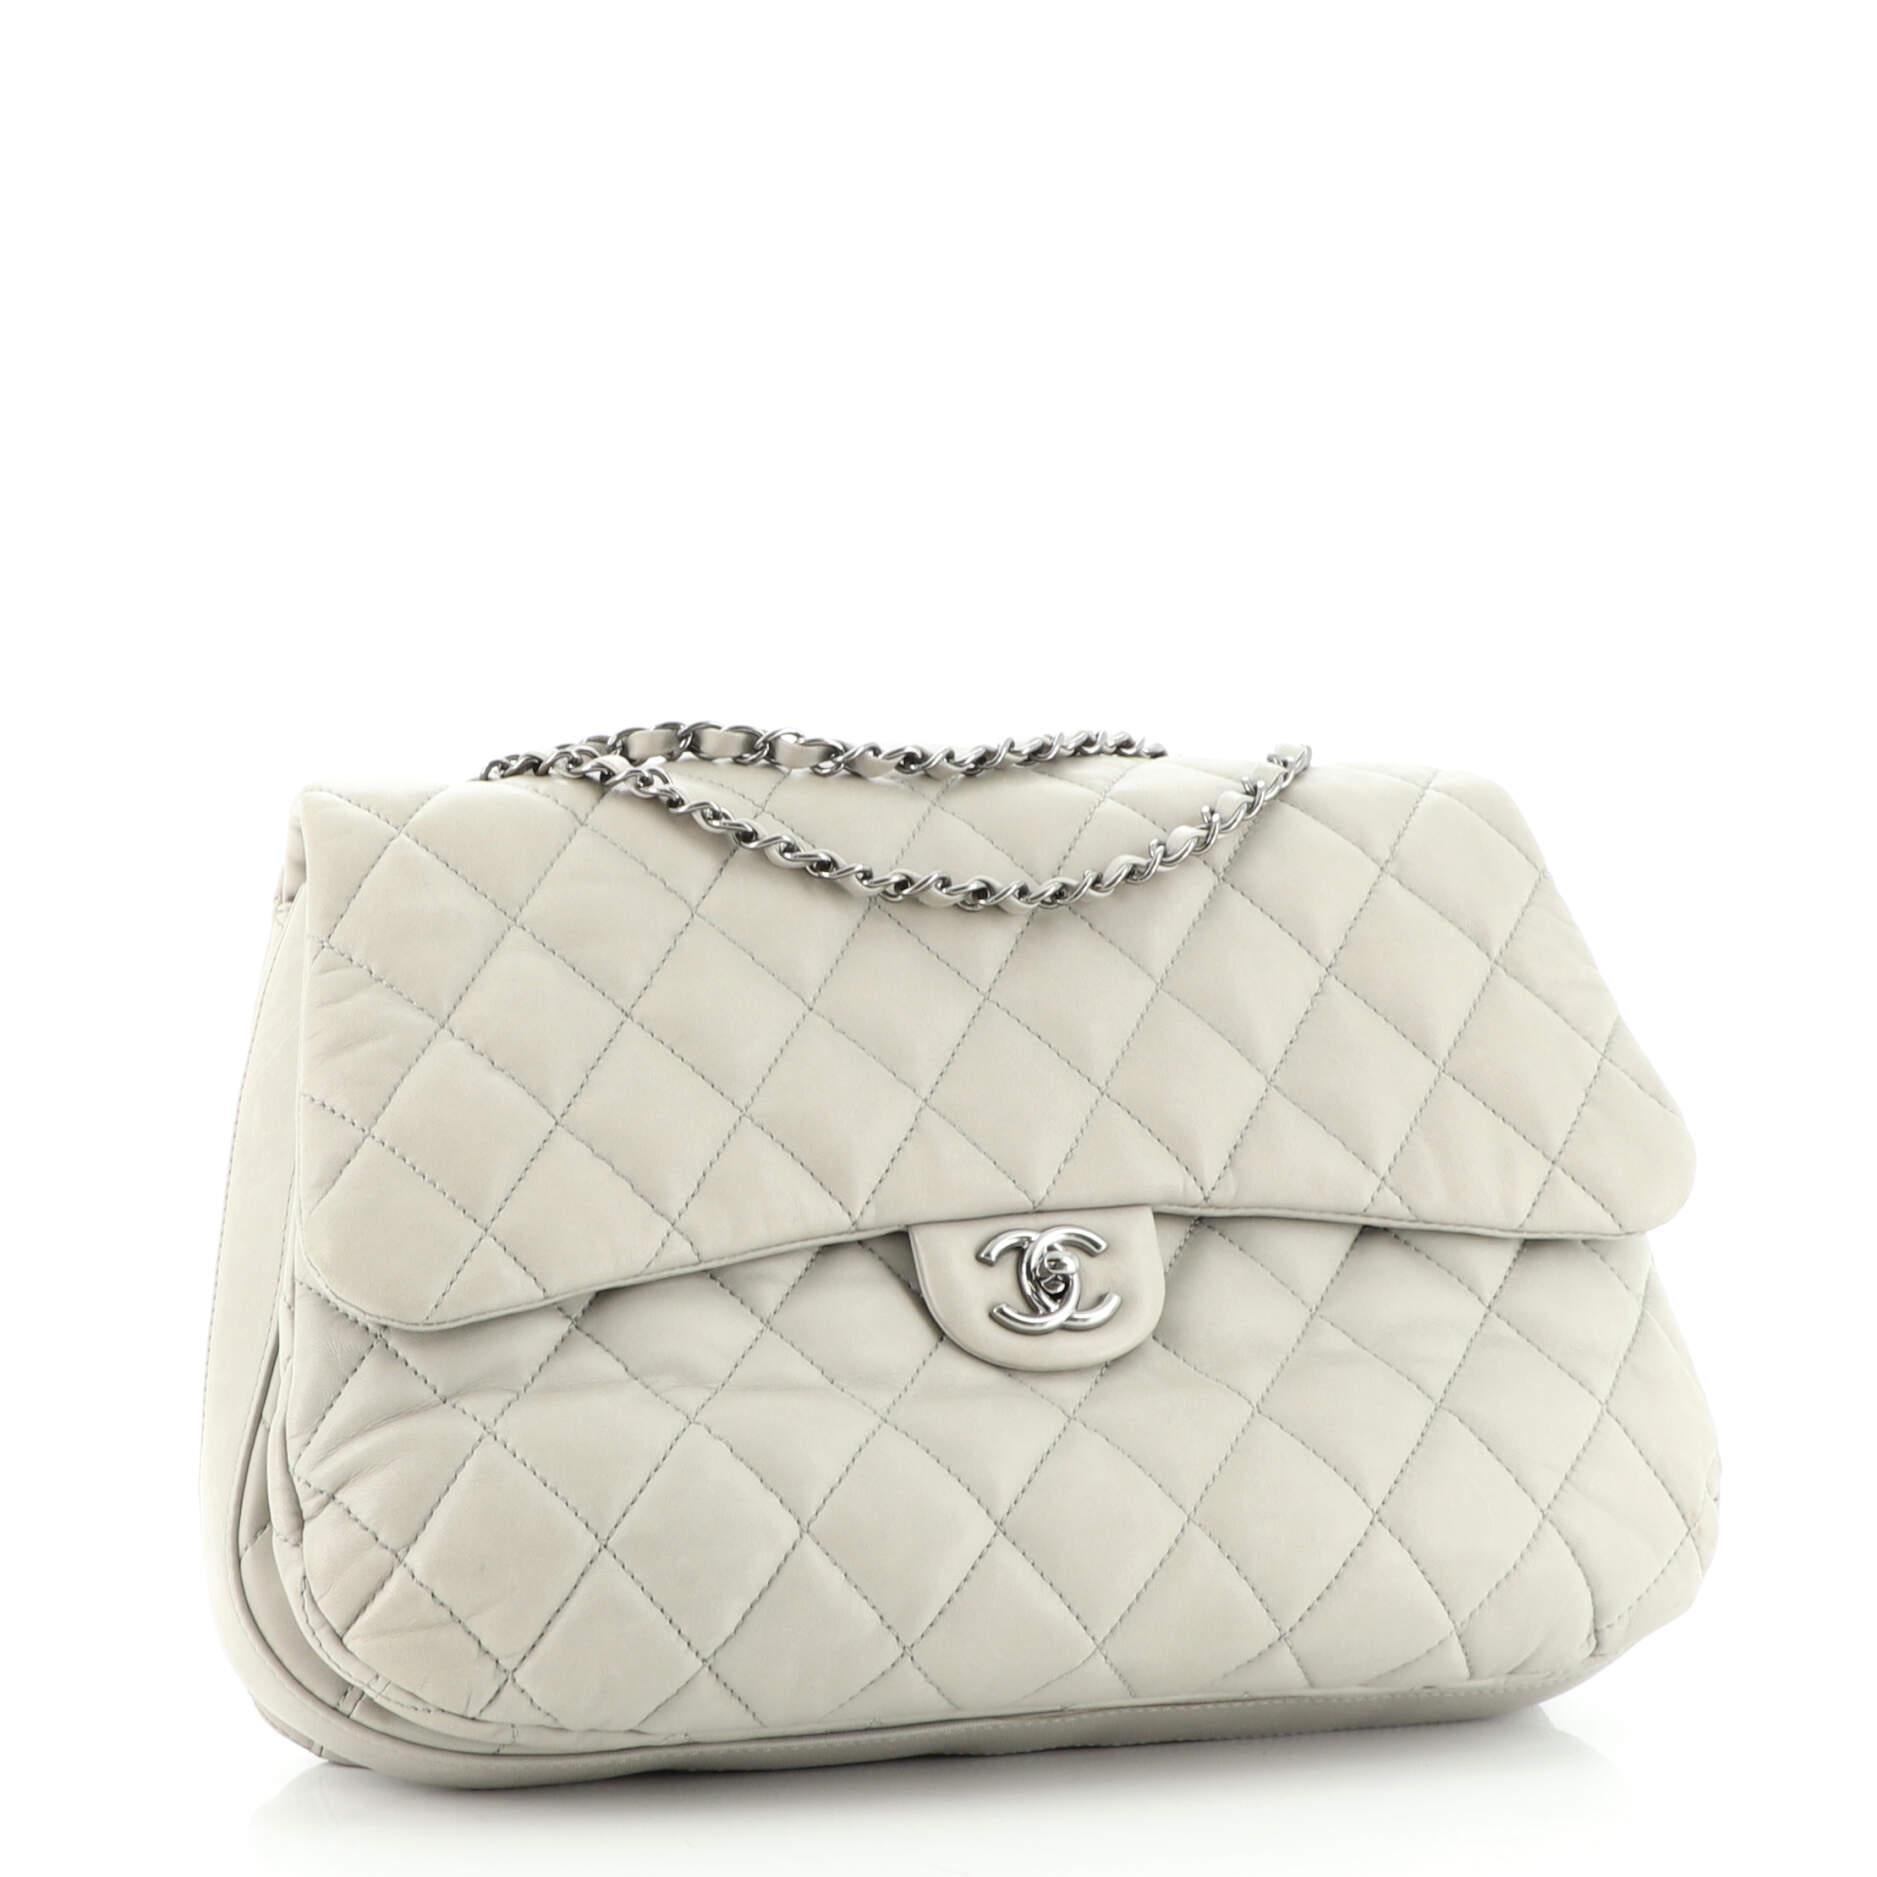 Beige Chanel 3 Accordion Bag Quilted Lambskin Maxi